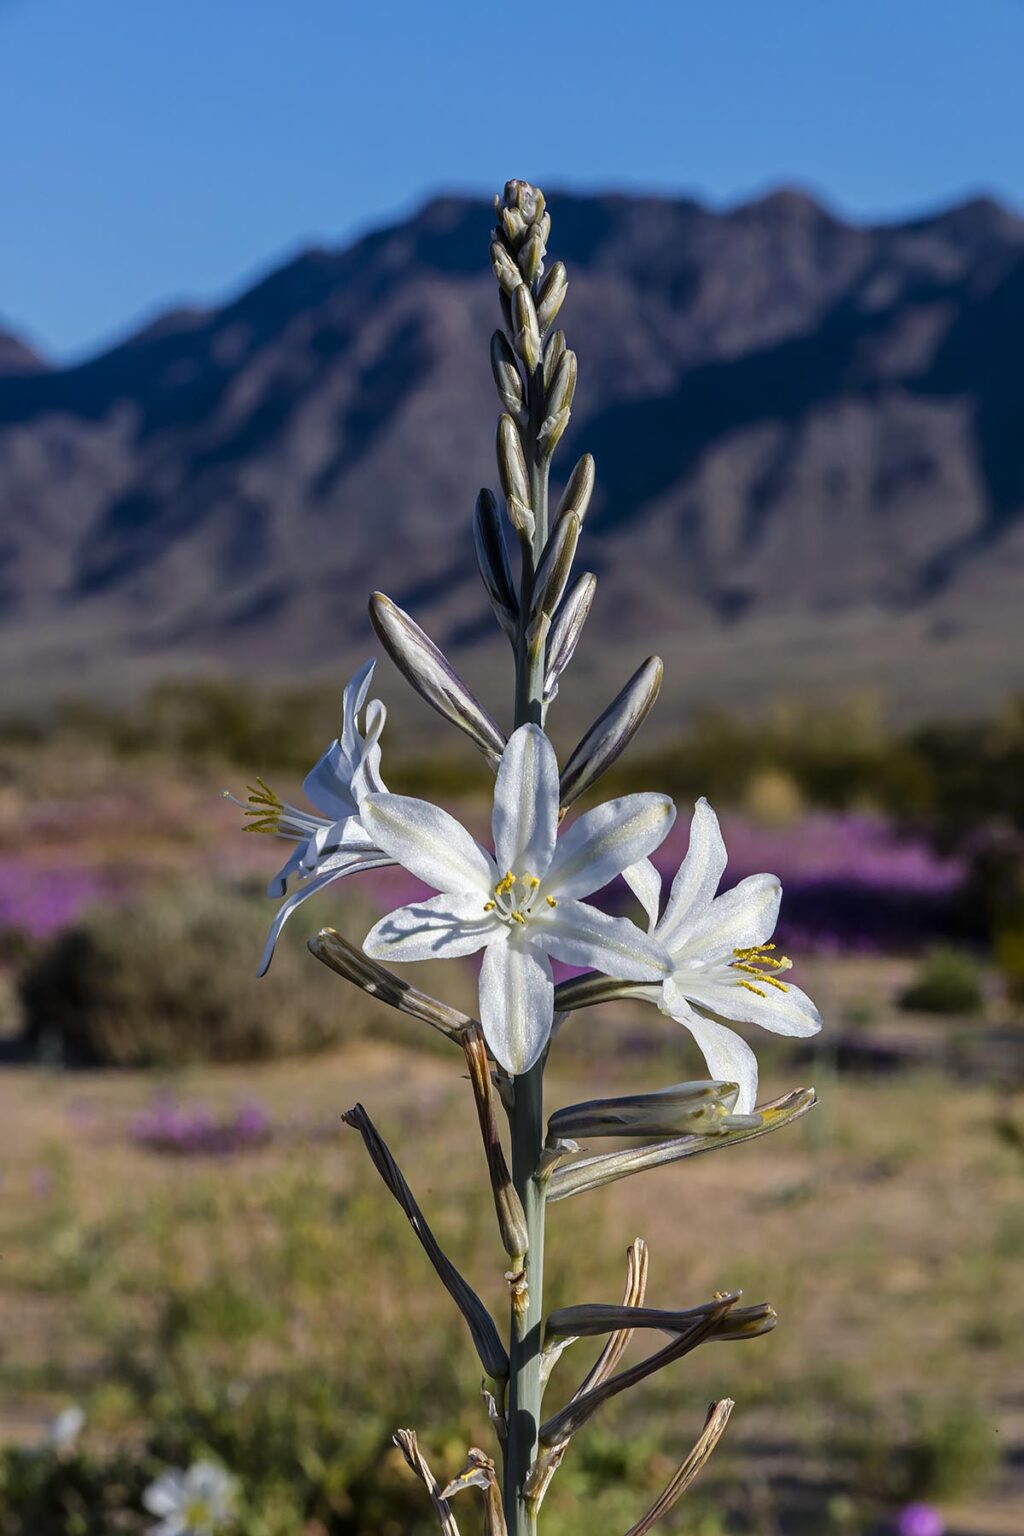 Early morning light on DESERT LILY (Hesperocallis undulate) at the foot of the COXCOMB MOUNTAINS - JOSHUA TREE NATIONAL PARK, CALIFORNIA